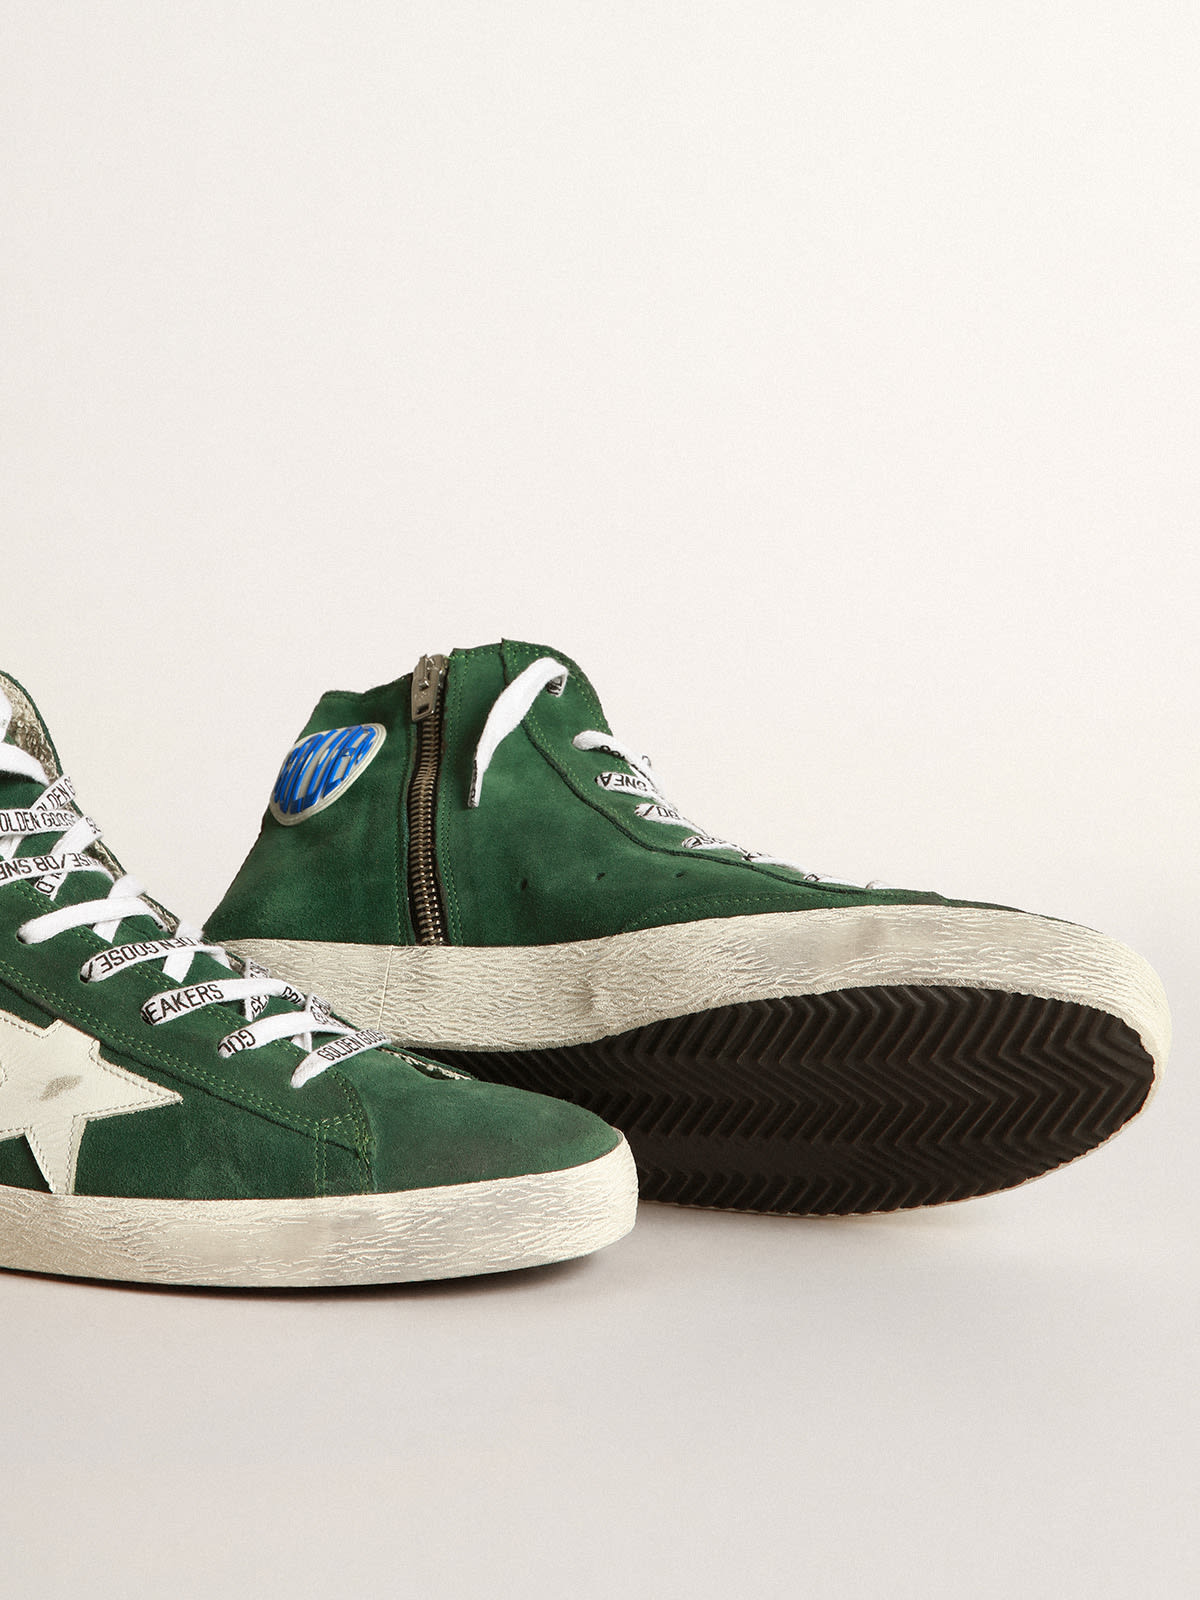 Golden Goose - Francy sneakers in green suede with white star in 